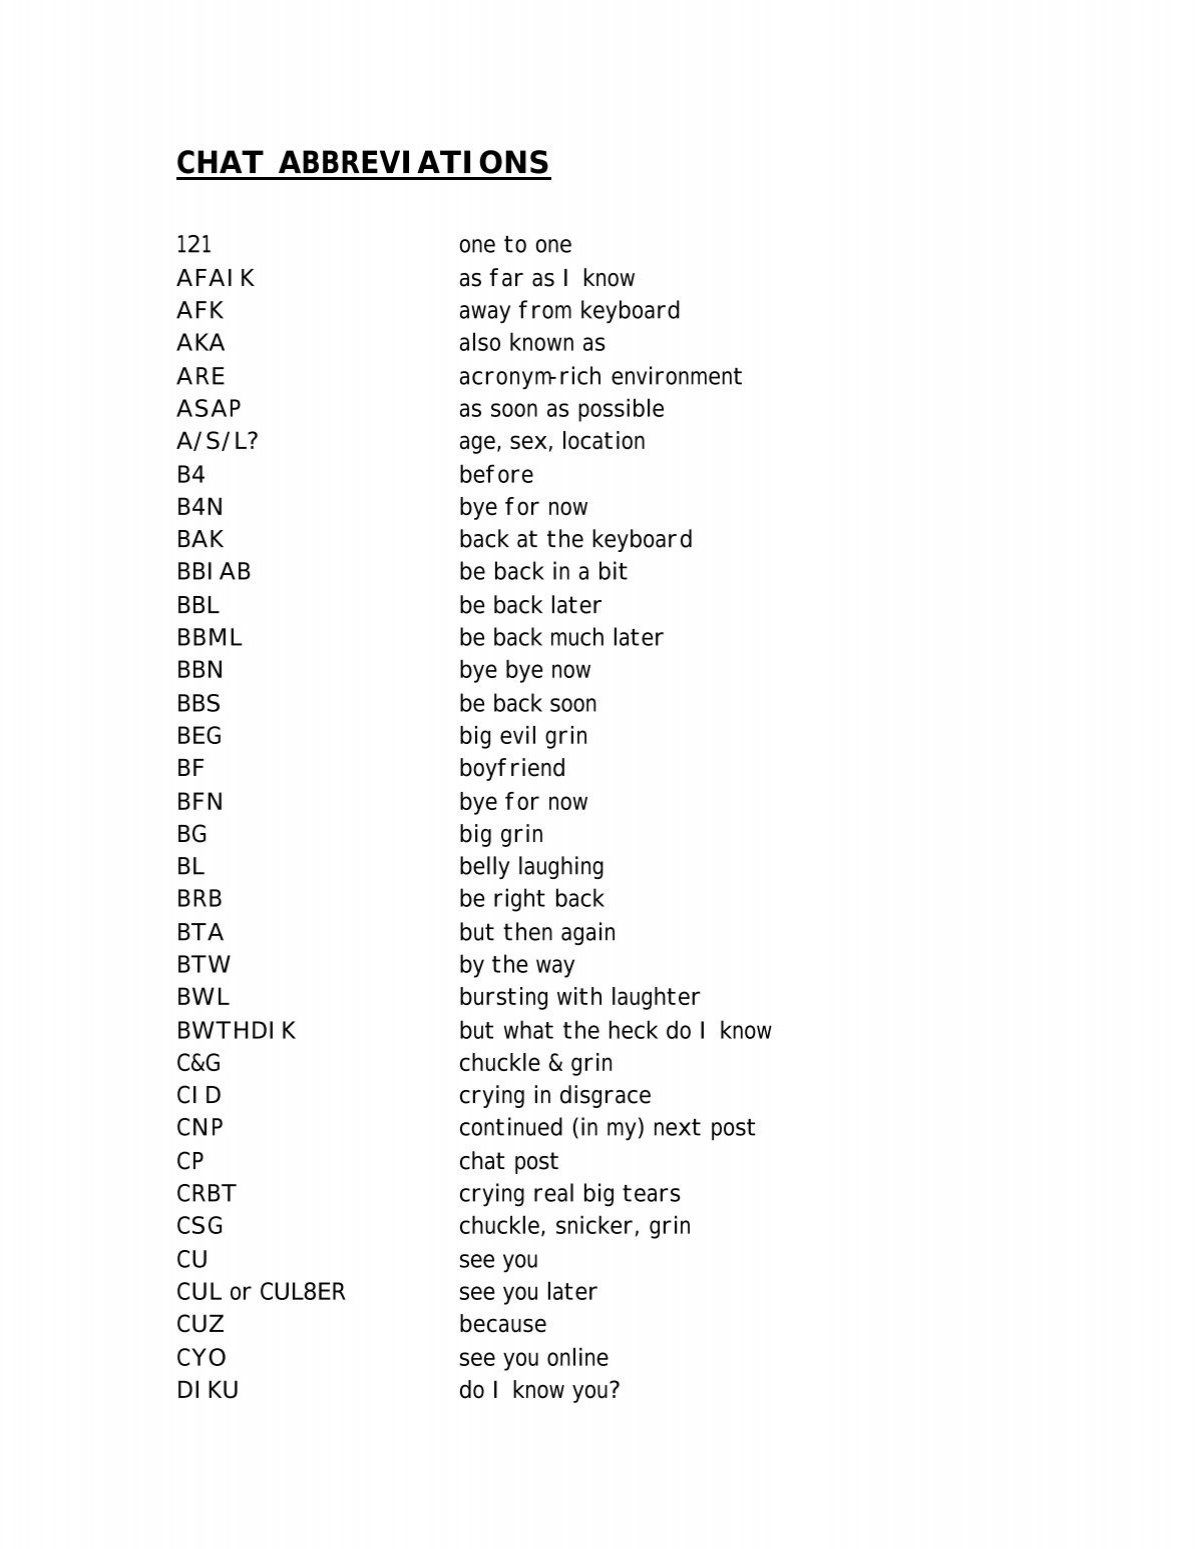 Chat/IRC/BBS - abbreviations and acronyms For the funny little